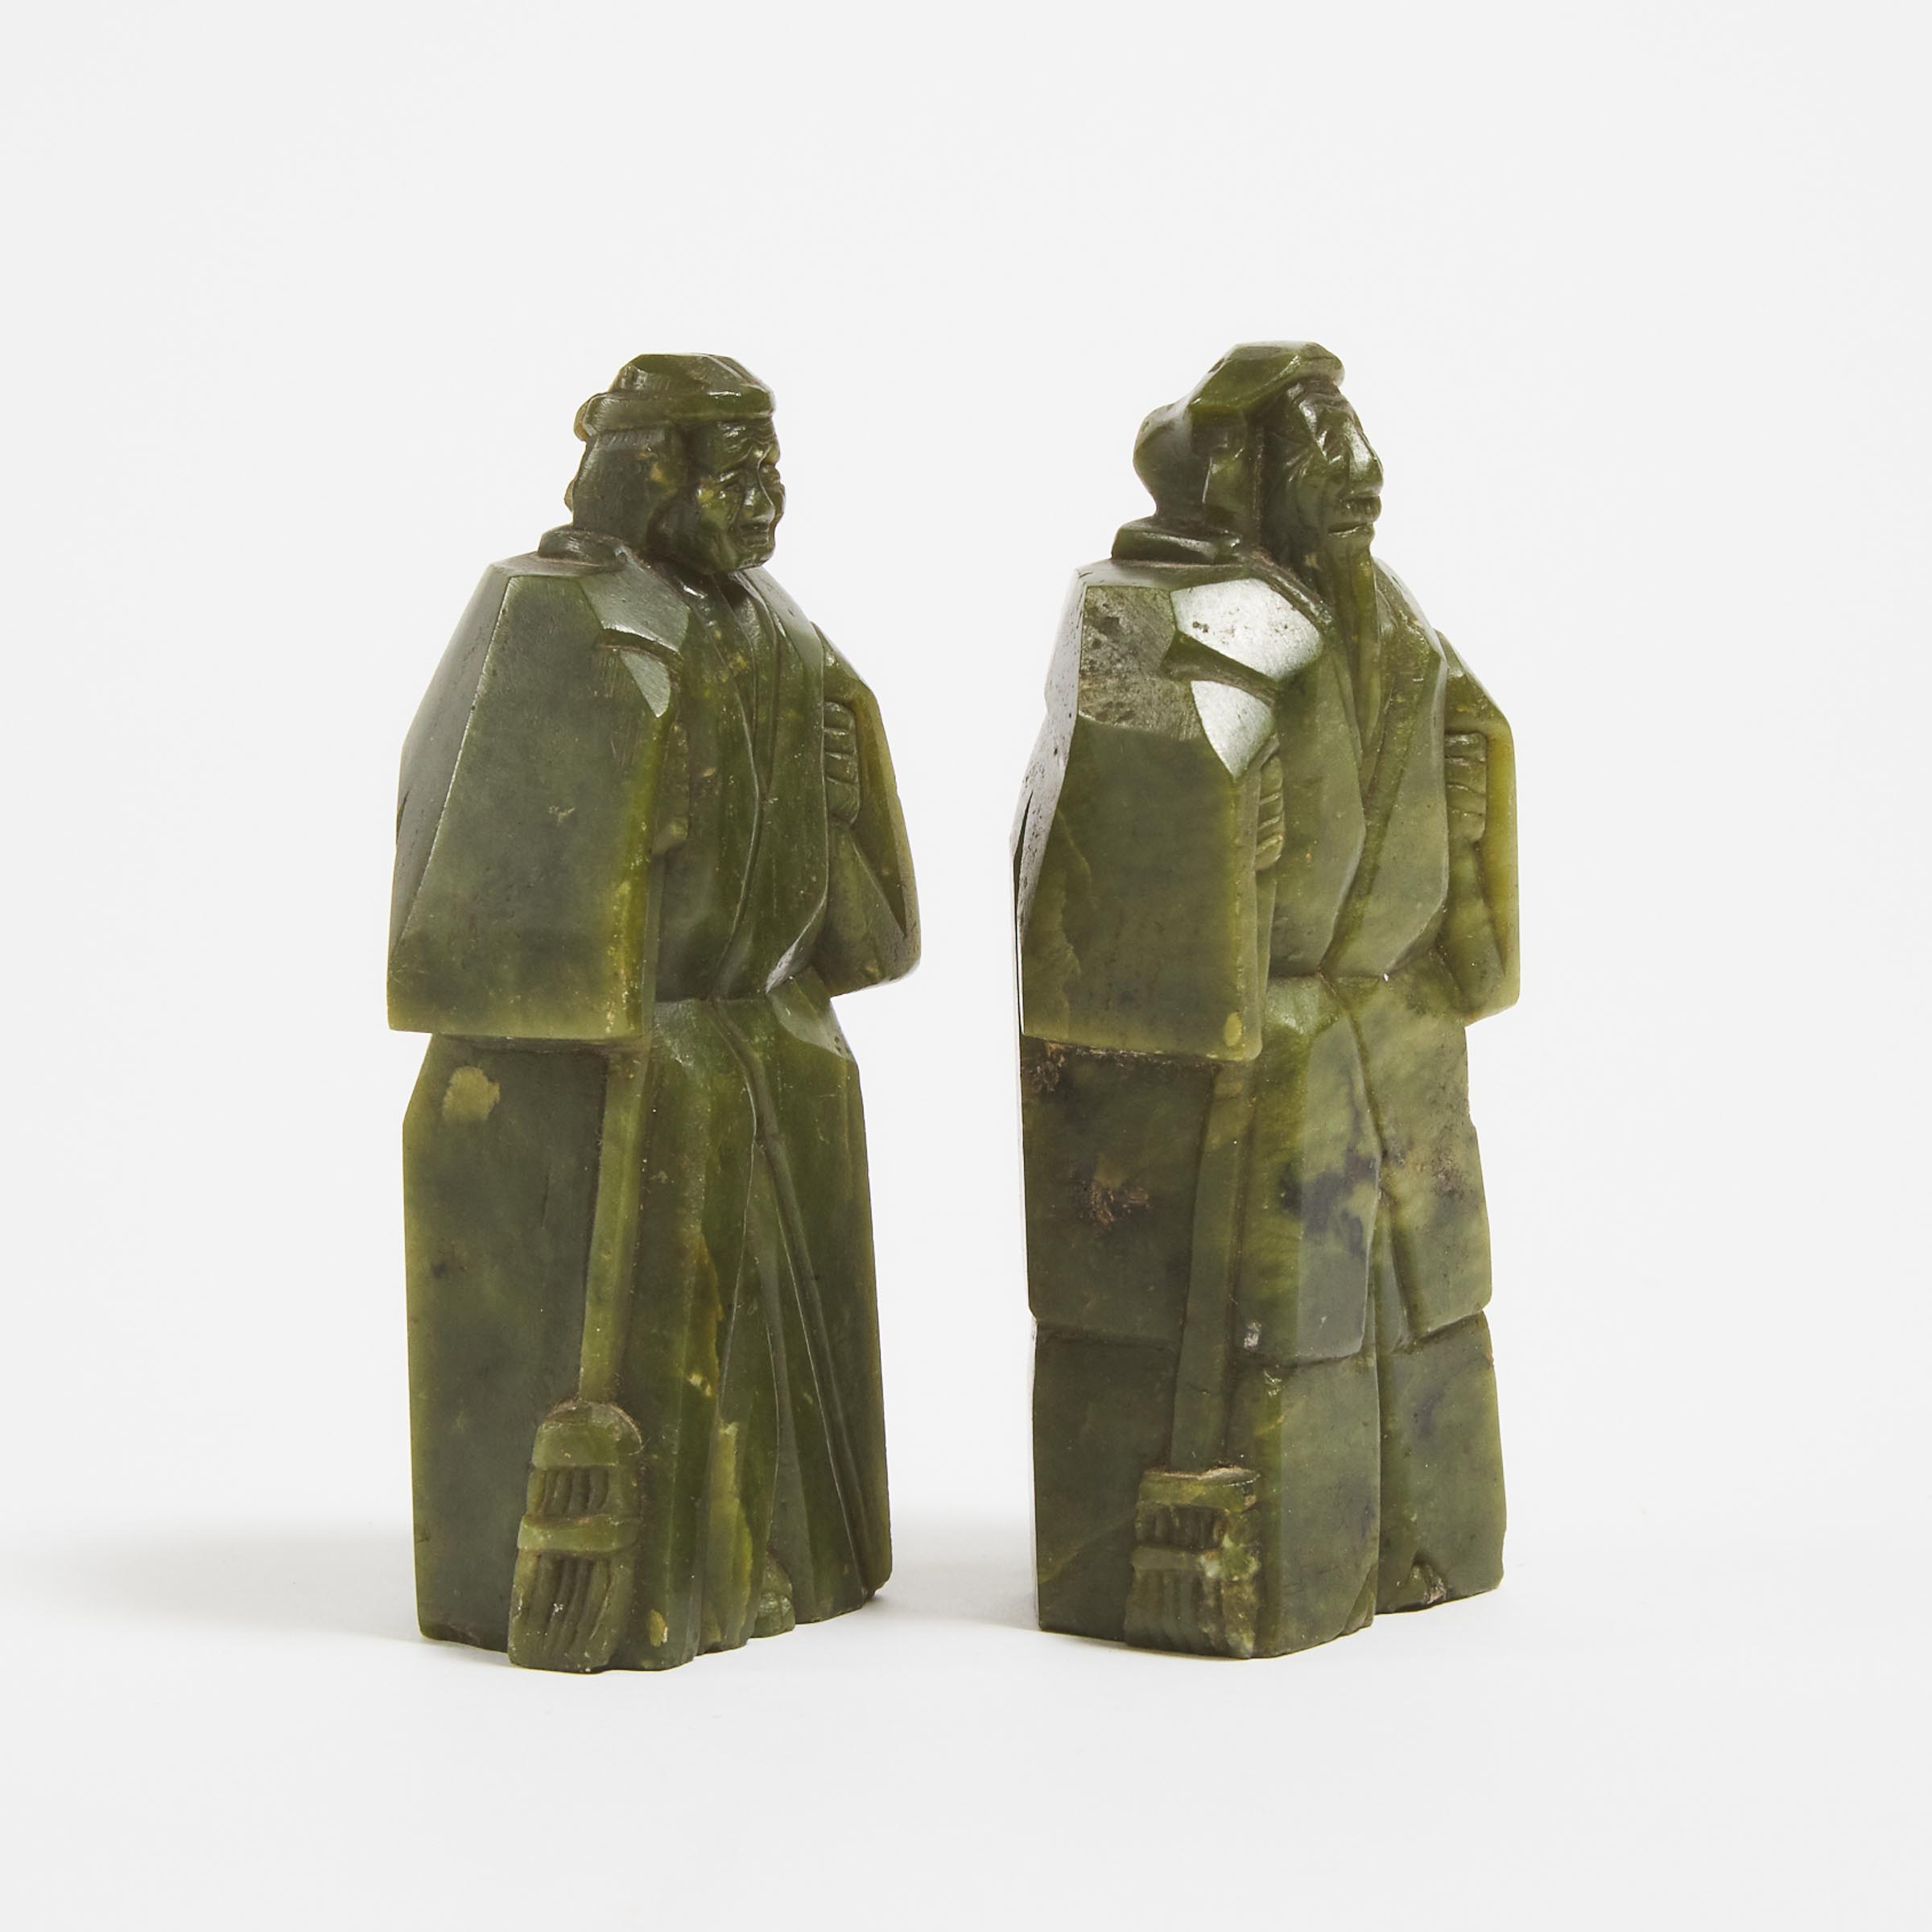 A Pair of Green Jade Figures of an Elderly Couple, Early 20th Century